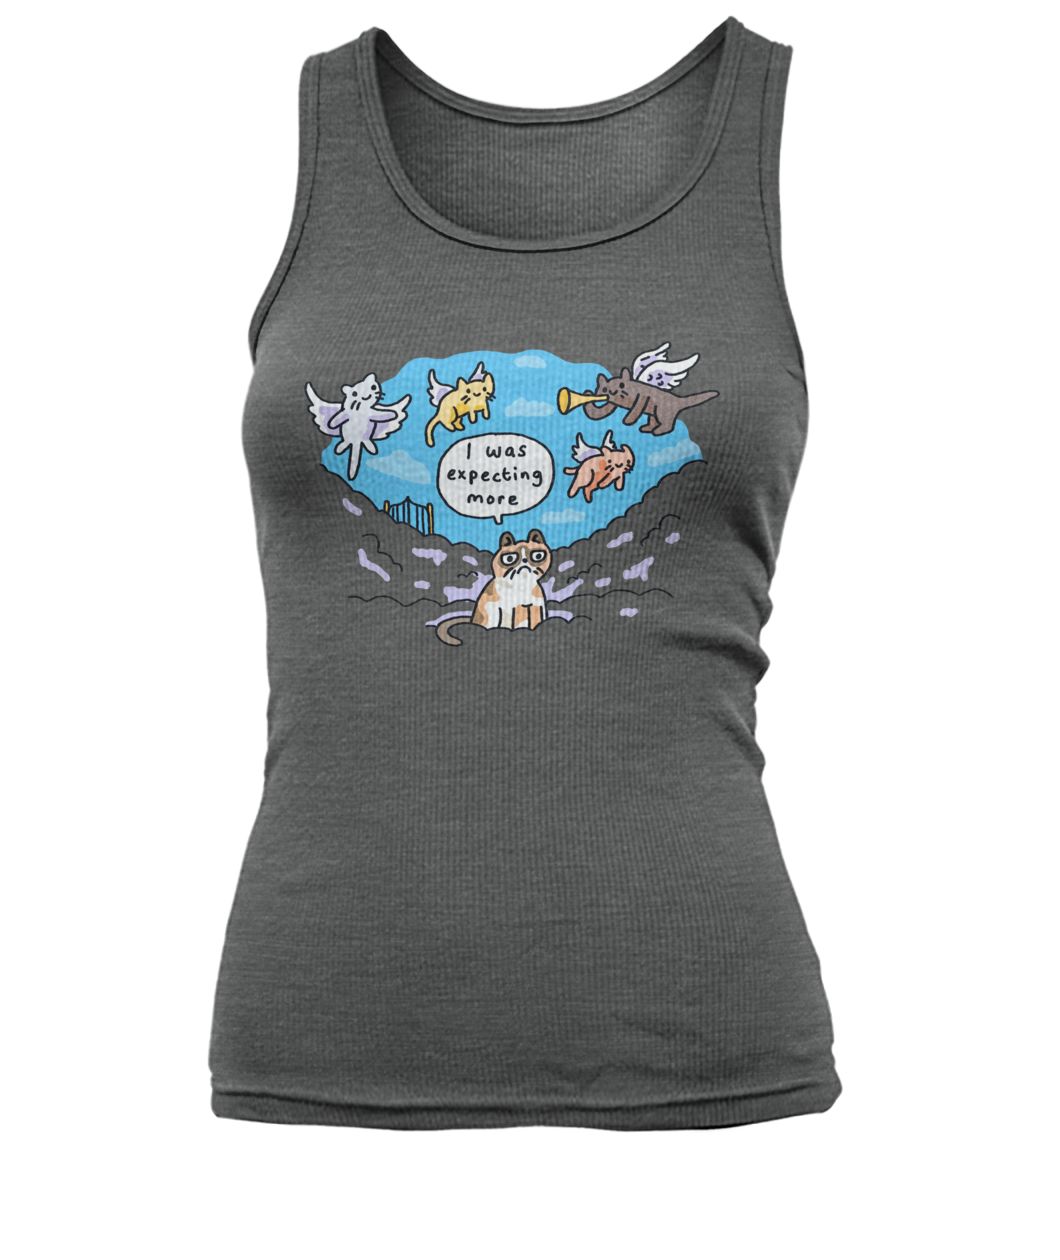 Grumpy cat I was expecting more women's tank top